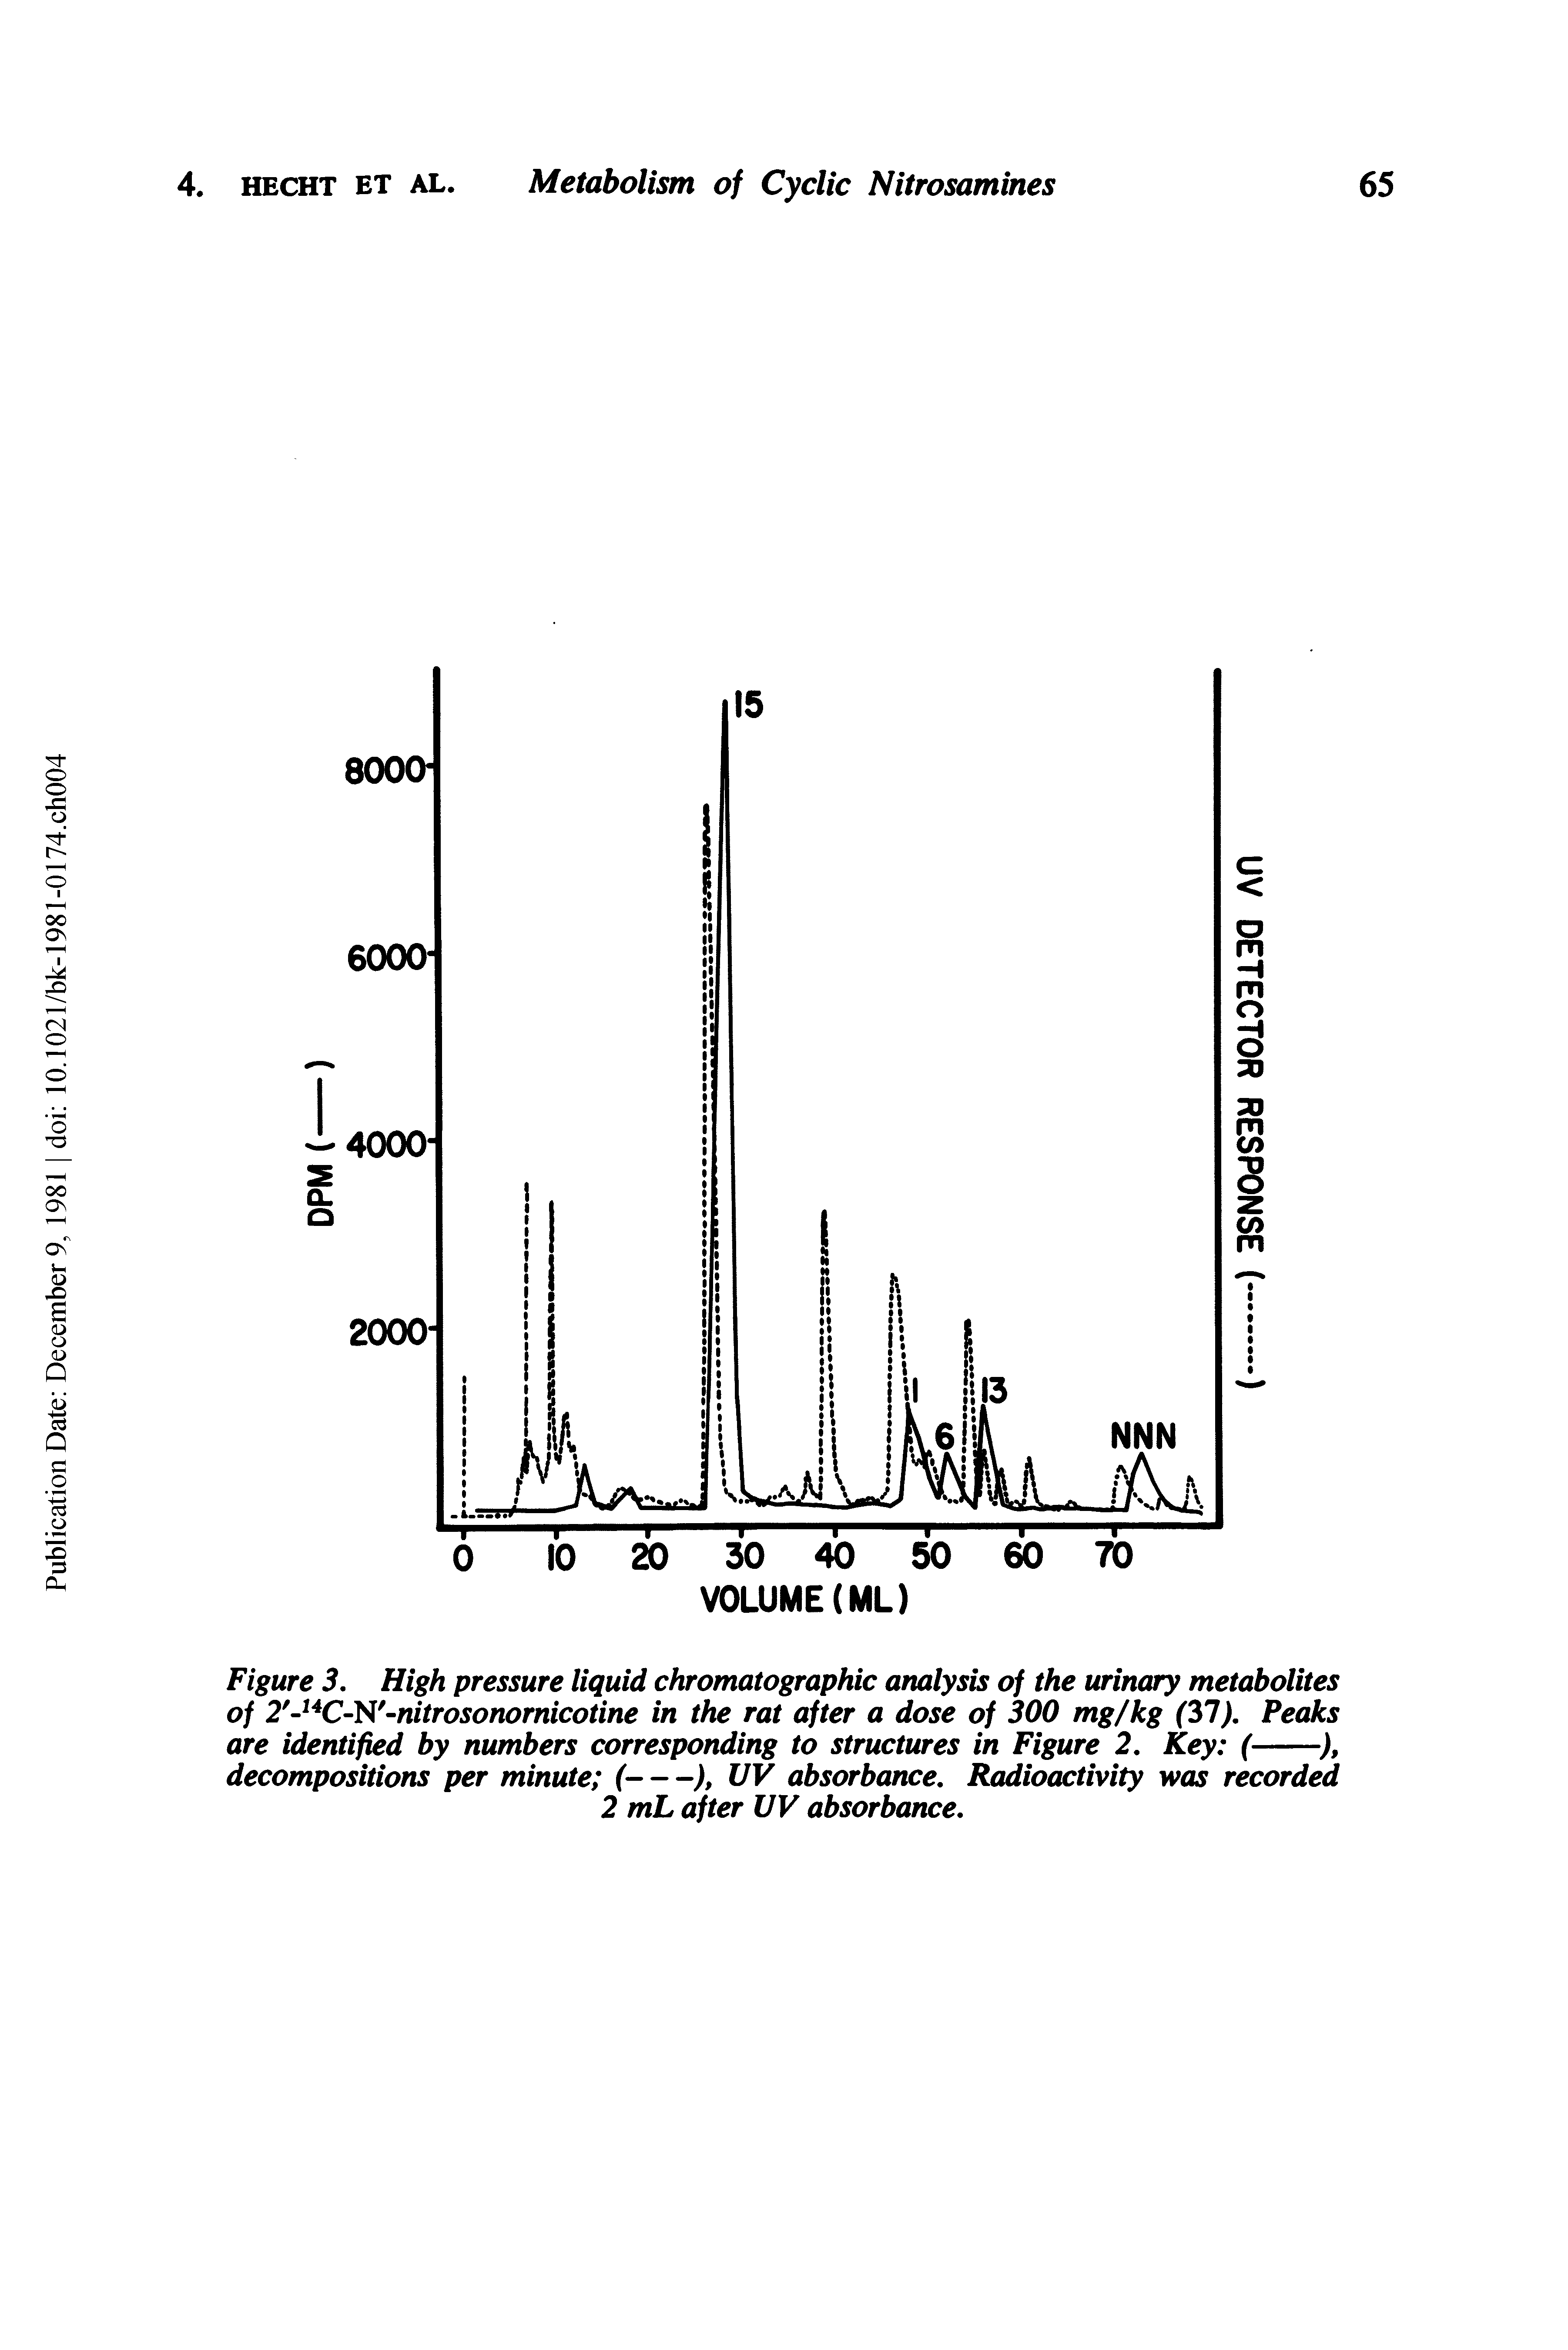 Figure 3. High pressure liquid chromatographic analysis of the urinary metabolites of 2 C N nitrosonornicotine in the rat after a dose of 300 mg/kg (31), Peaks...